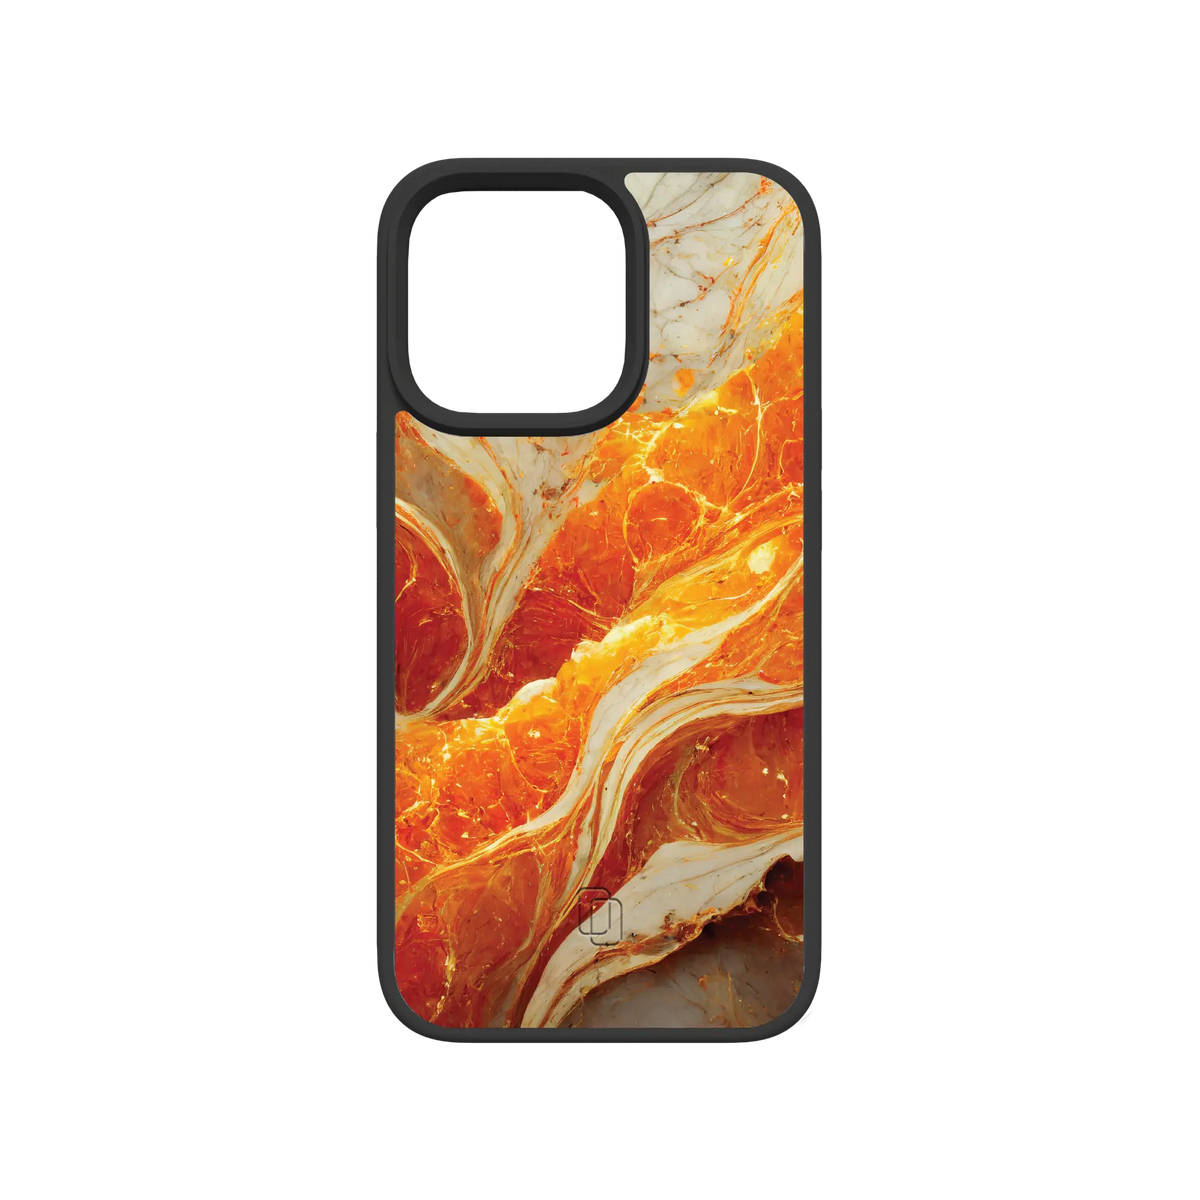 Apple-iPhone-13-Pro-Crystal-Clear Golden Sunrise | Protective MagSafe Case | Marble Stone Collection for Apple iPhone 13 Series cellhelmet cellhelmet